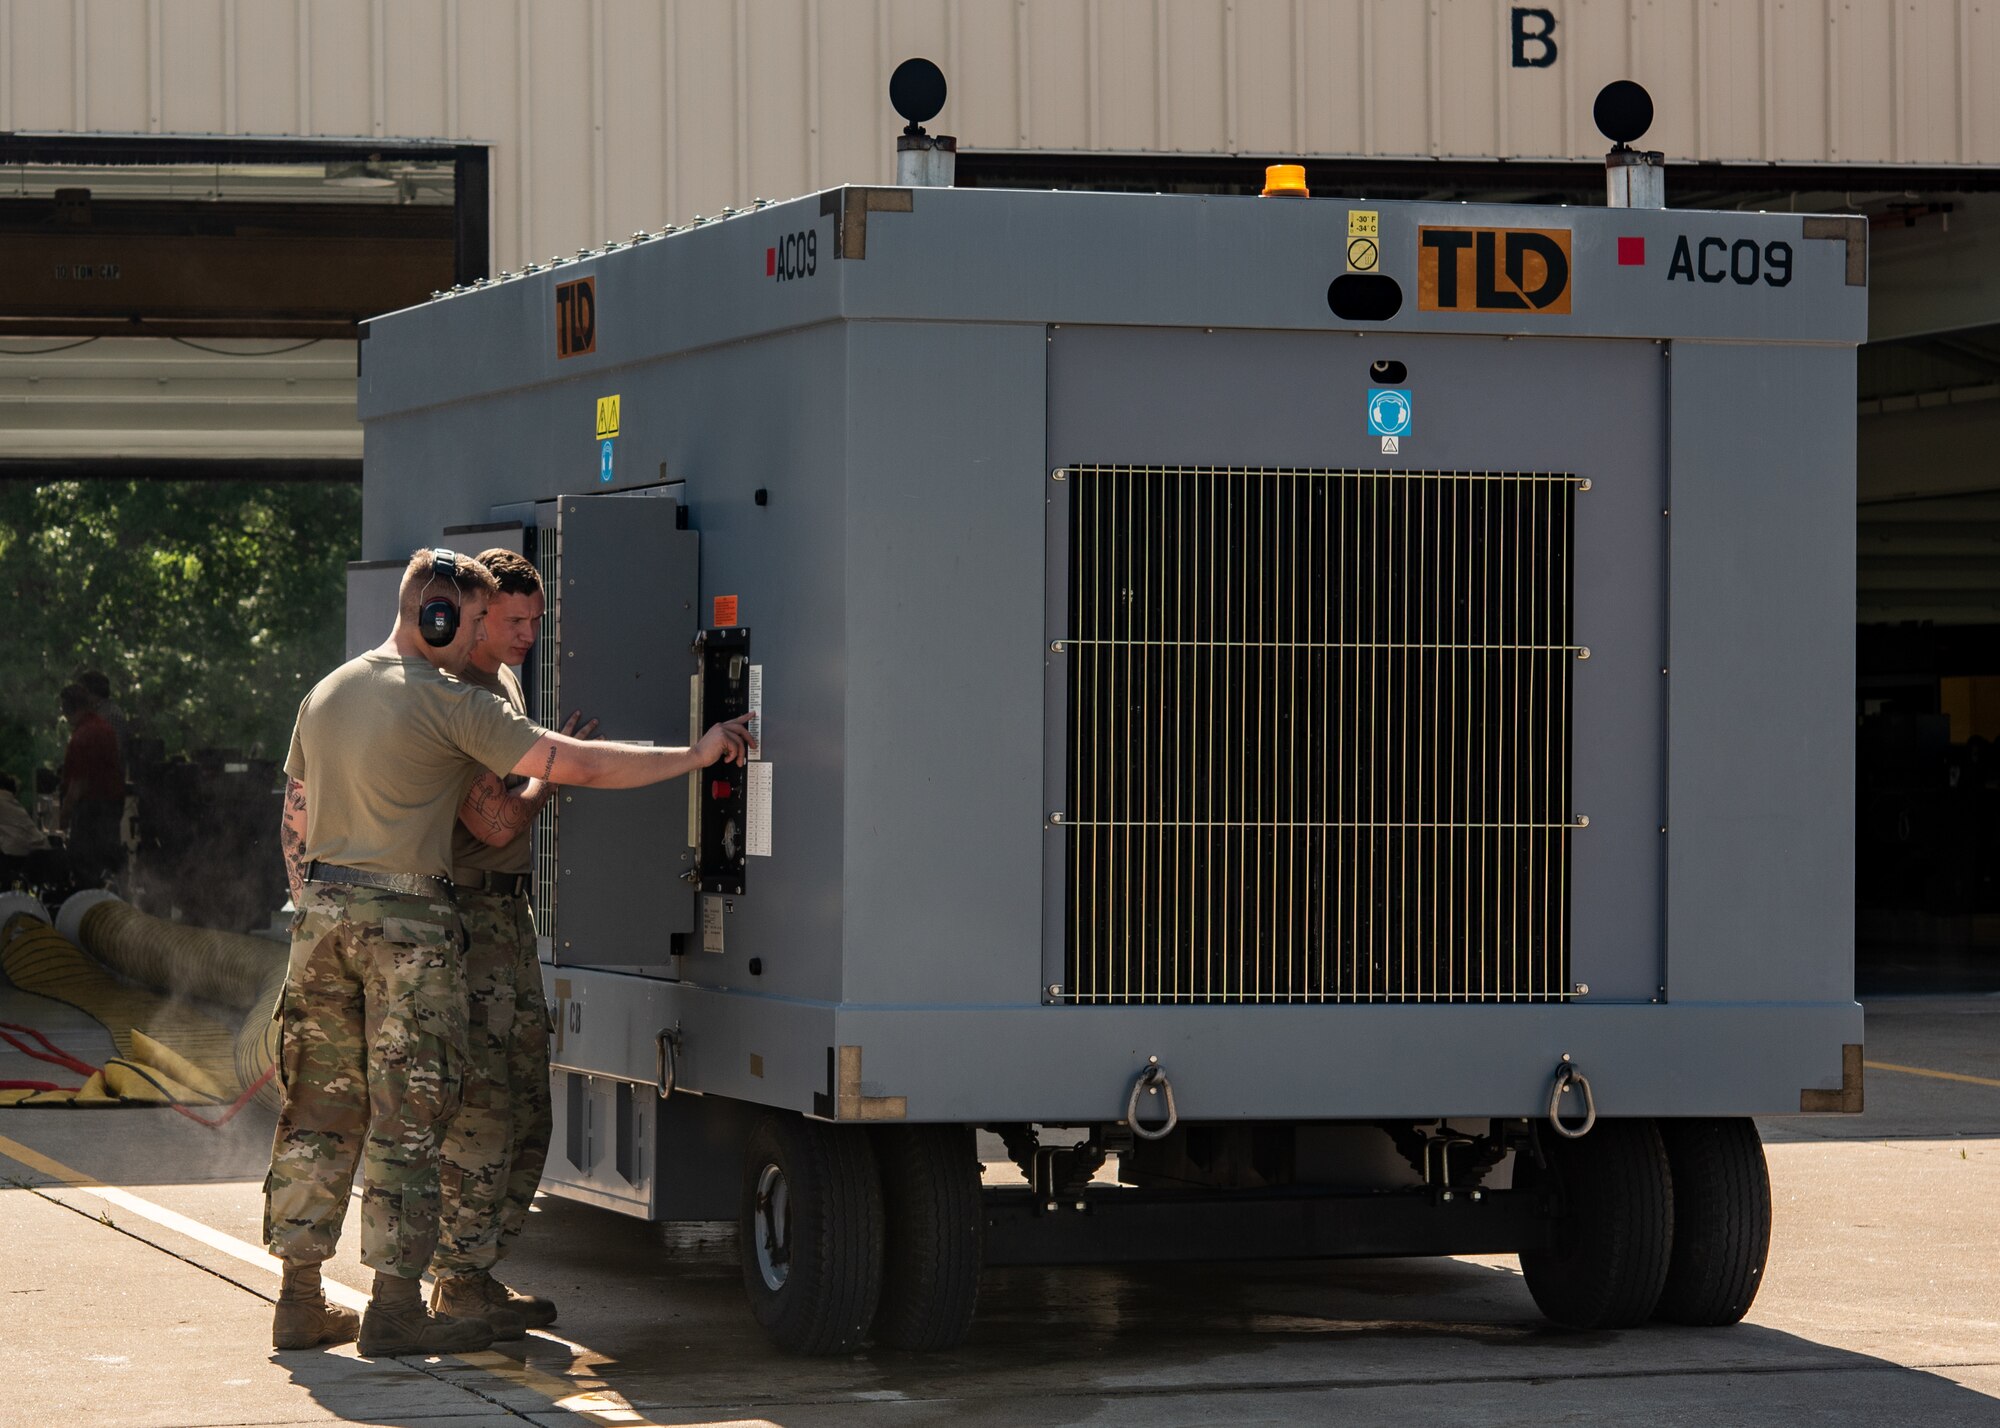 Airmen 1st Class Logan Peters and Devin Julia, aerospace ground equipment apprentices, assigned to the 509th Maintenance Squadron, test a potential B-2 HVAC system for the B-2 Spirit Stealth Bomber on July 18, 2019, at Whiteman Air Force Base, Missouri. The data collected will be compiled and summarized by the University of Dayton Research Institute and Air Force Research Laboratory in order to make a final decision on an HVAC system for the B-2. (U.S. Air Force photo by Senior Airman Thomas Barley)